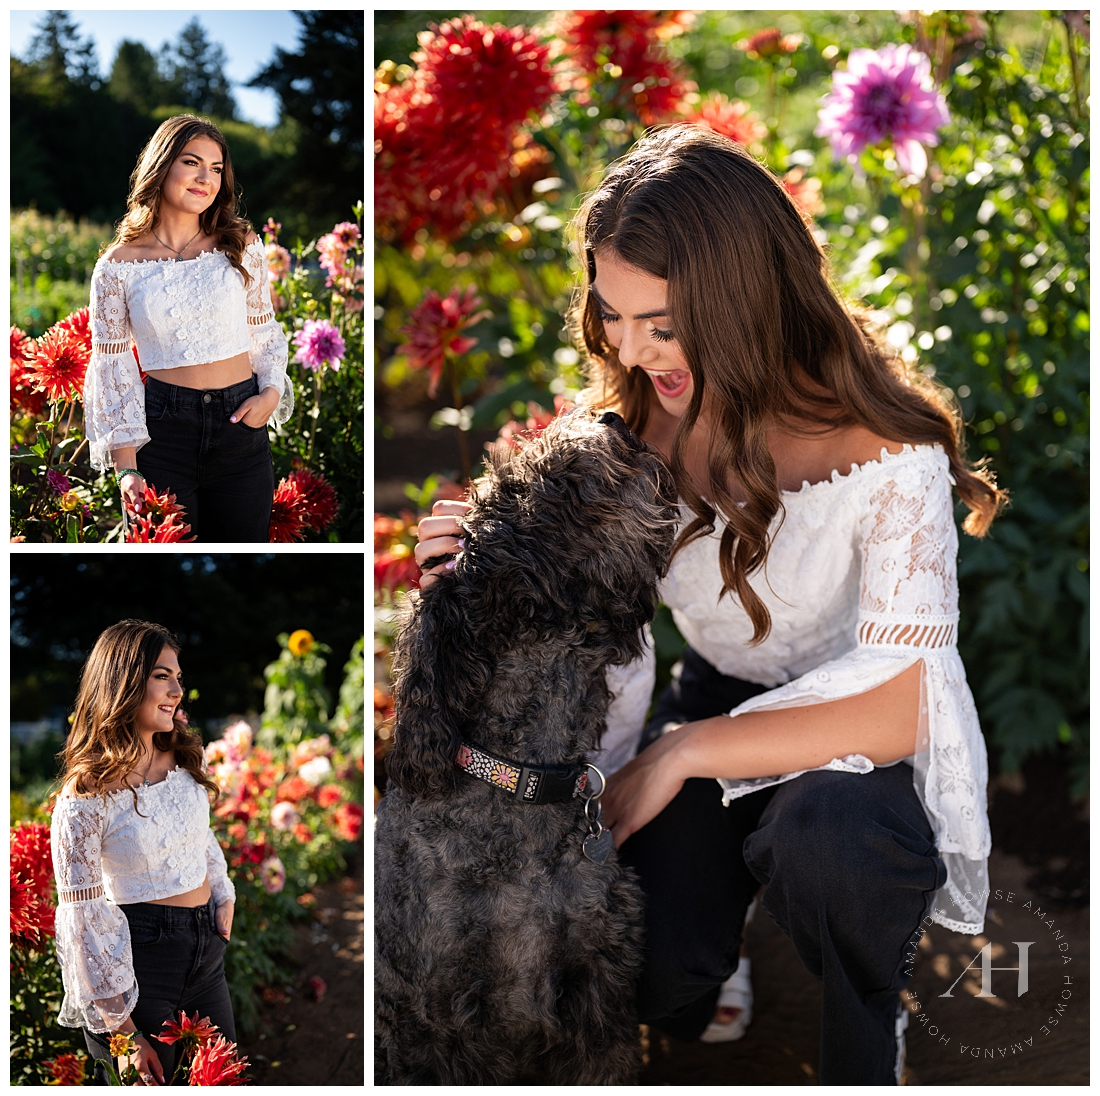 Why Furry Friends are the Best Senior Portrait Support | Summertime Photos | Amanda Howse Photography 